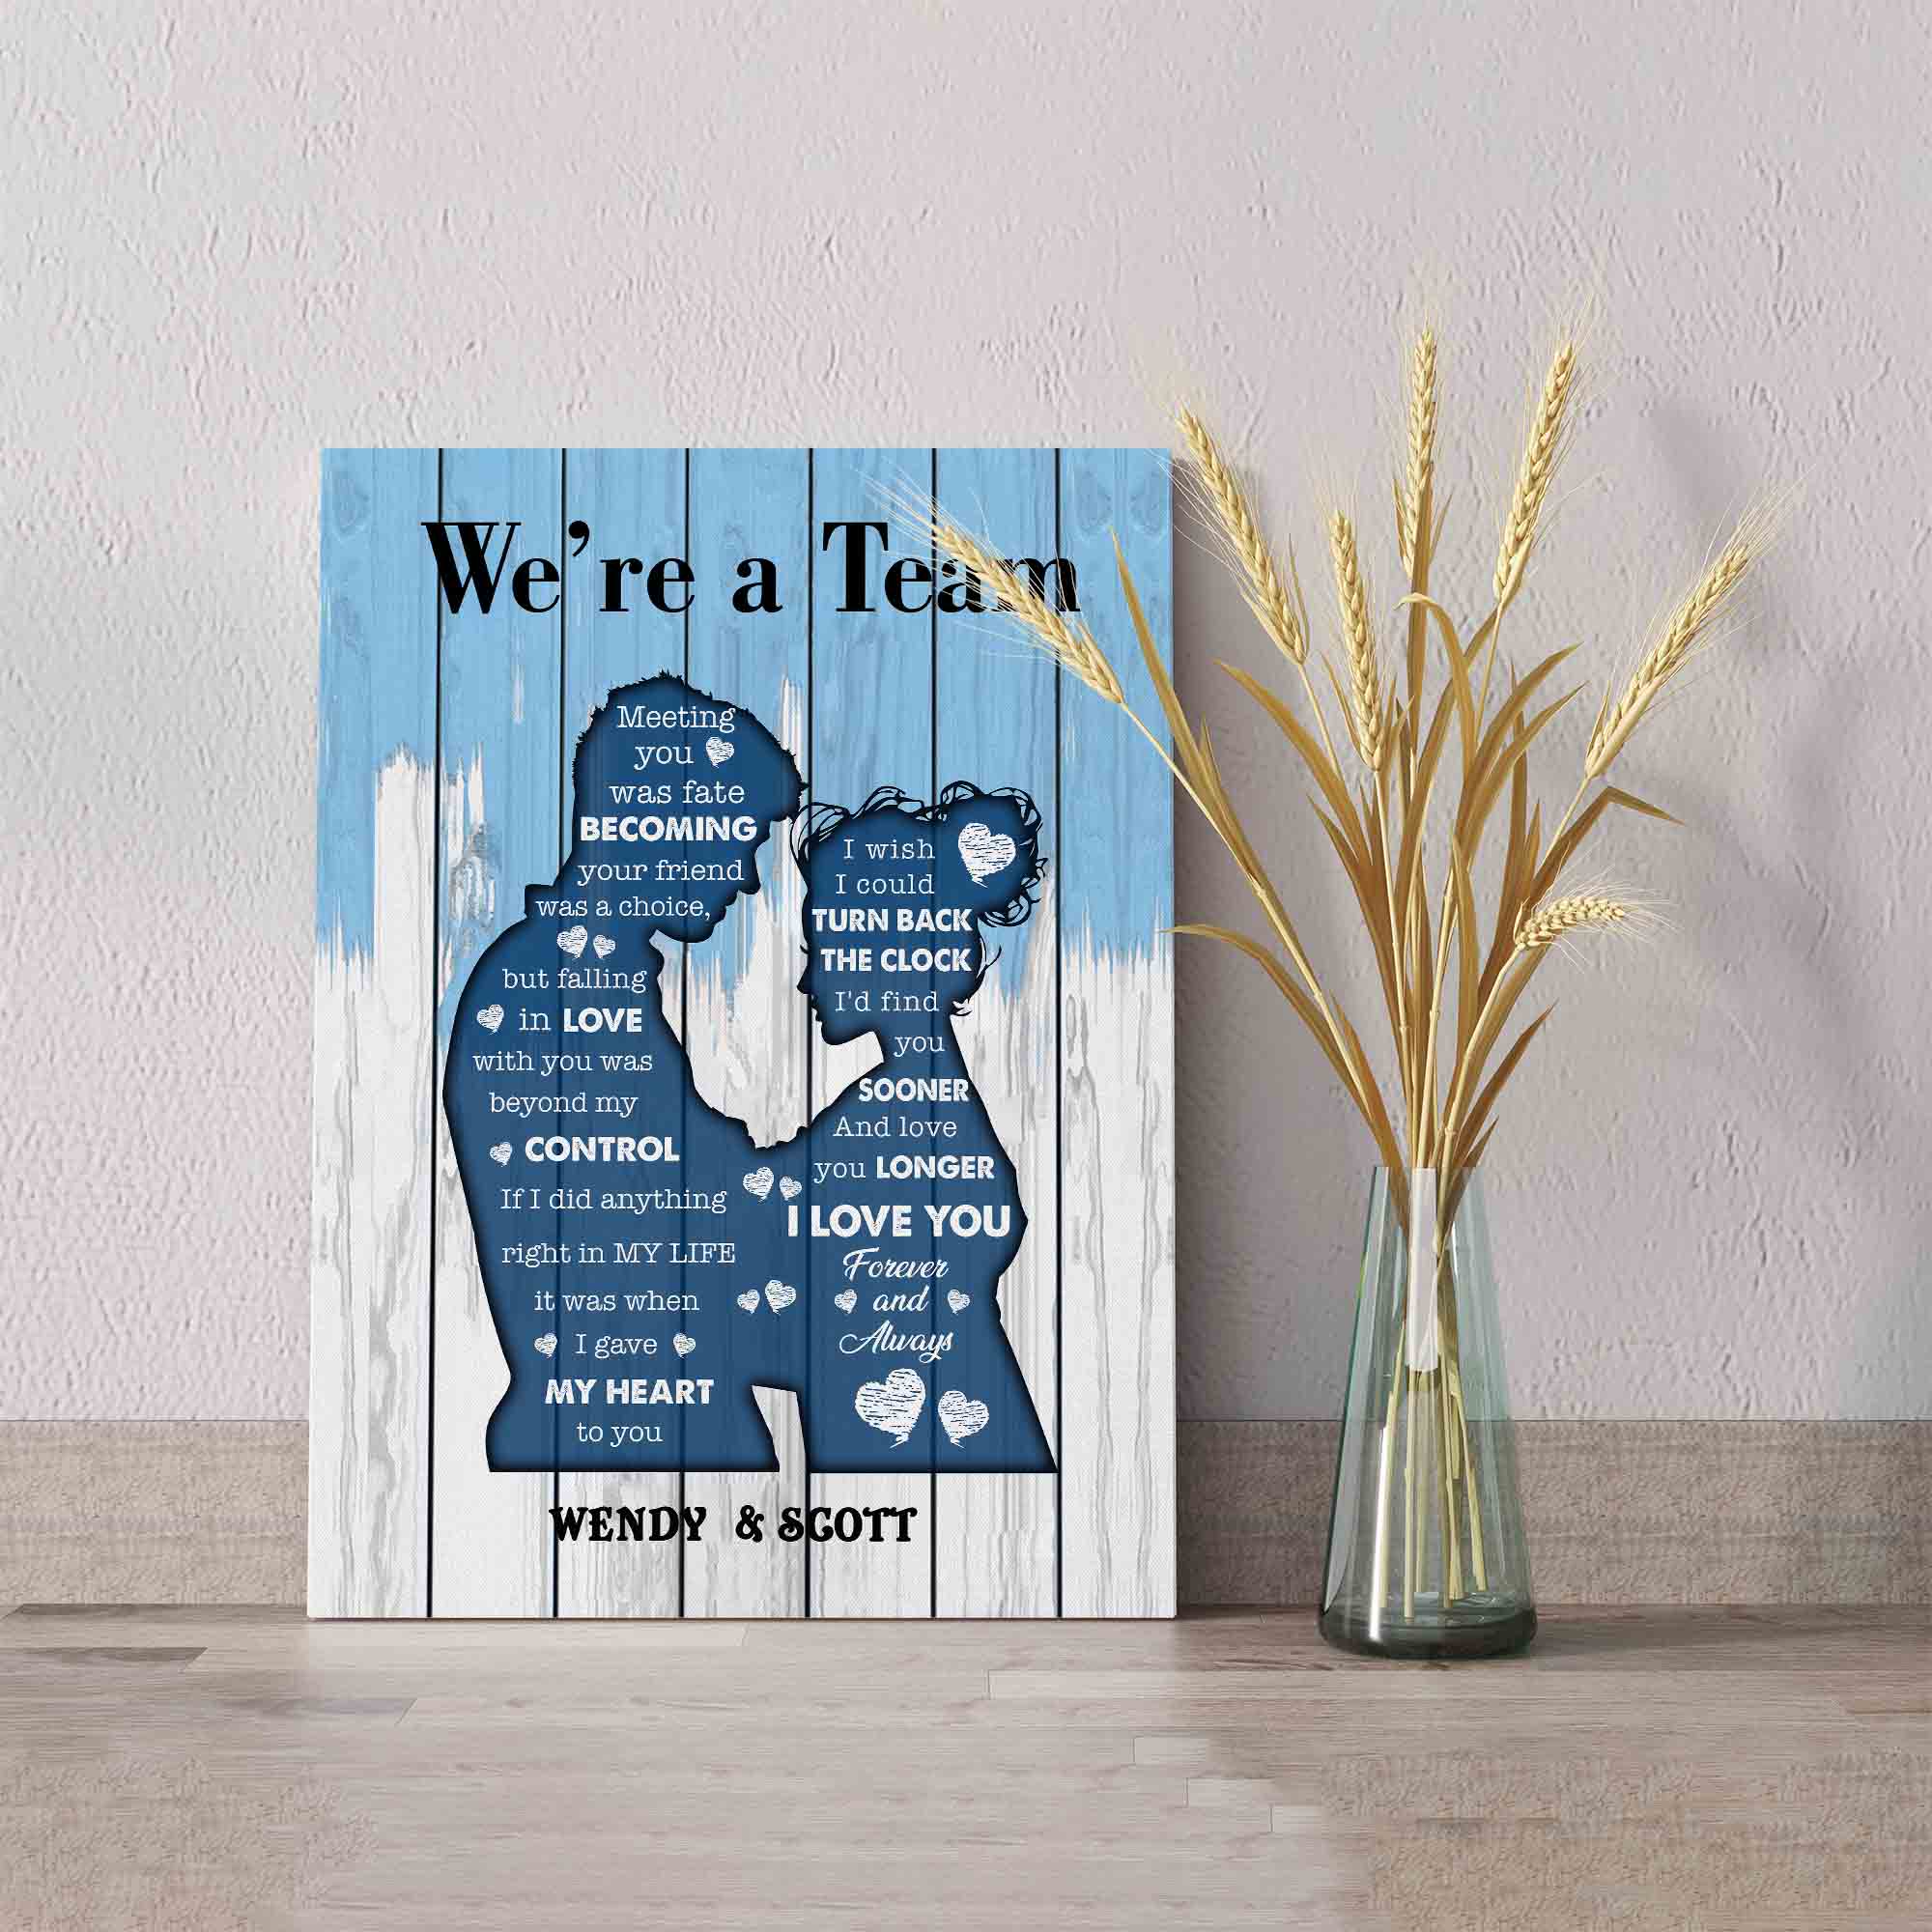 Personalized Name Canvas, We're A Team Canvas, Heart Canvas, Couple Canvas, Wall Art Canvas, Gift Canvas